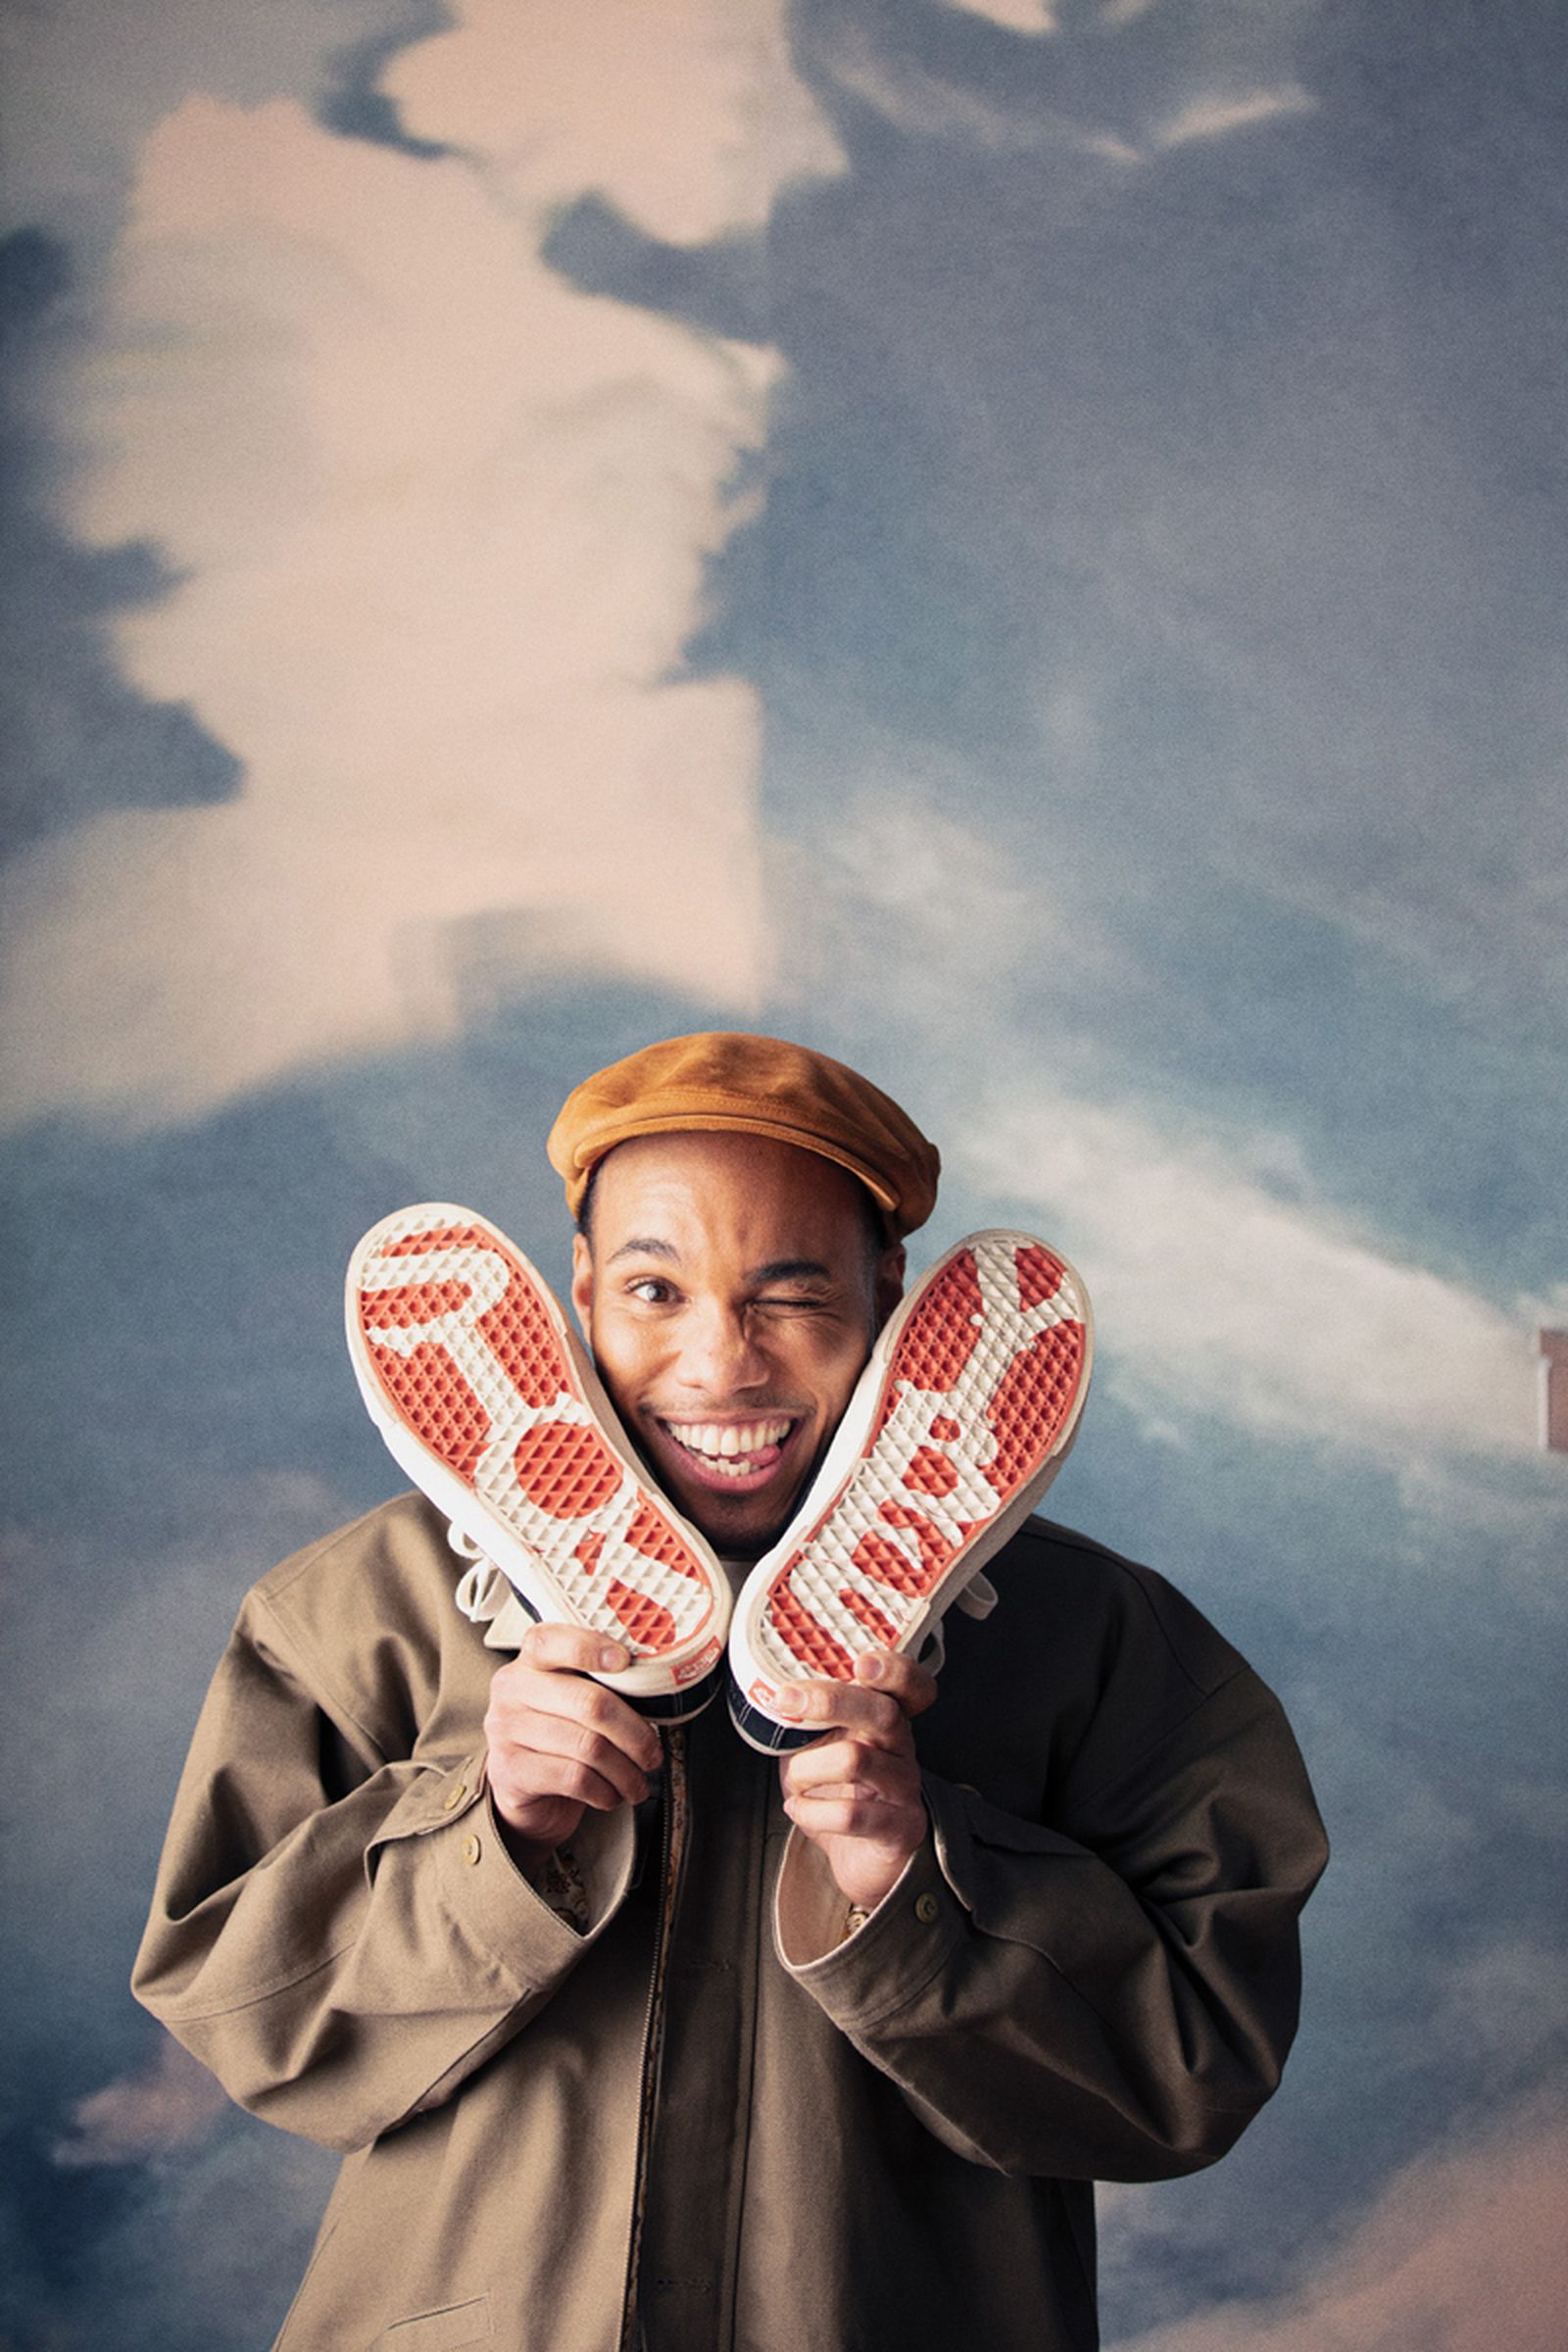 vans-anderson-paak-sneakers-apparel-collab-collection-0